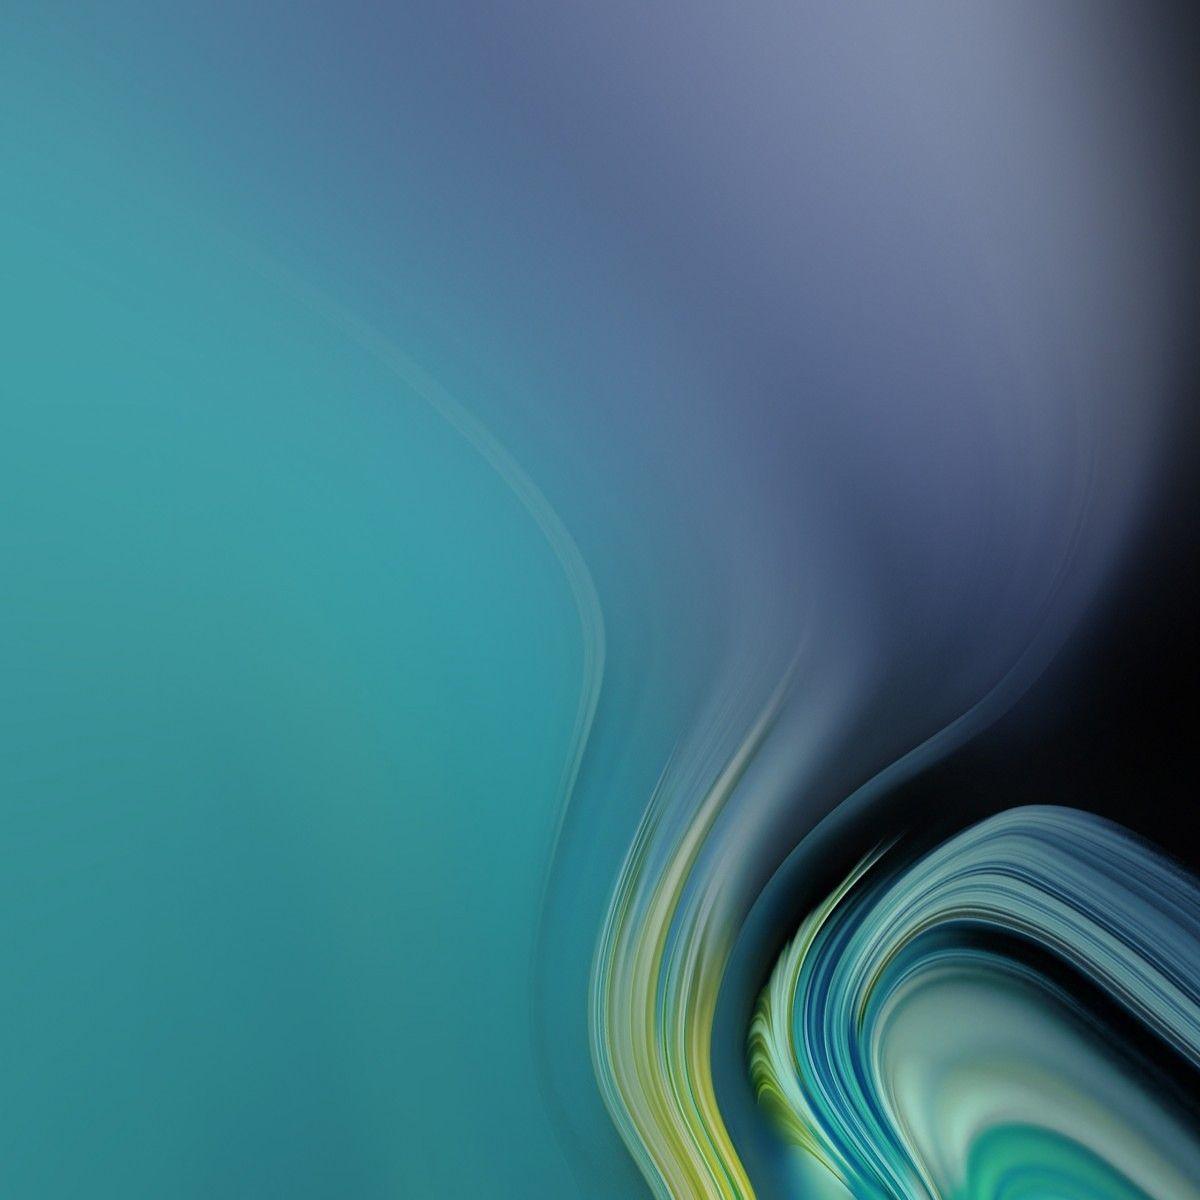 Samsung Note 9 Wallpapers - Top Free